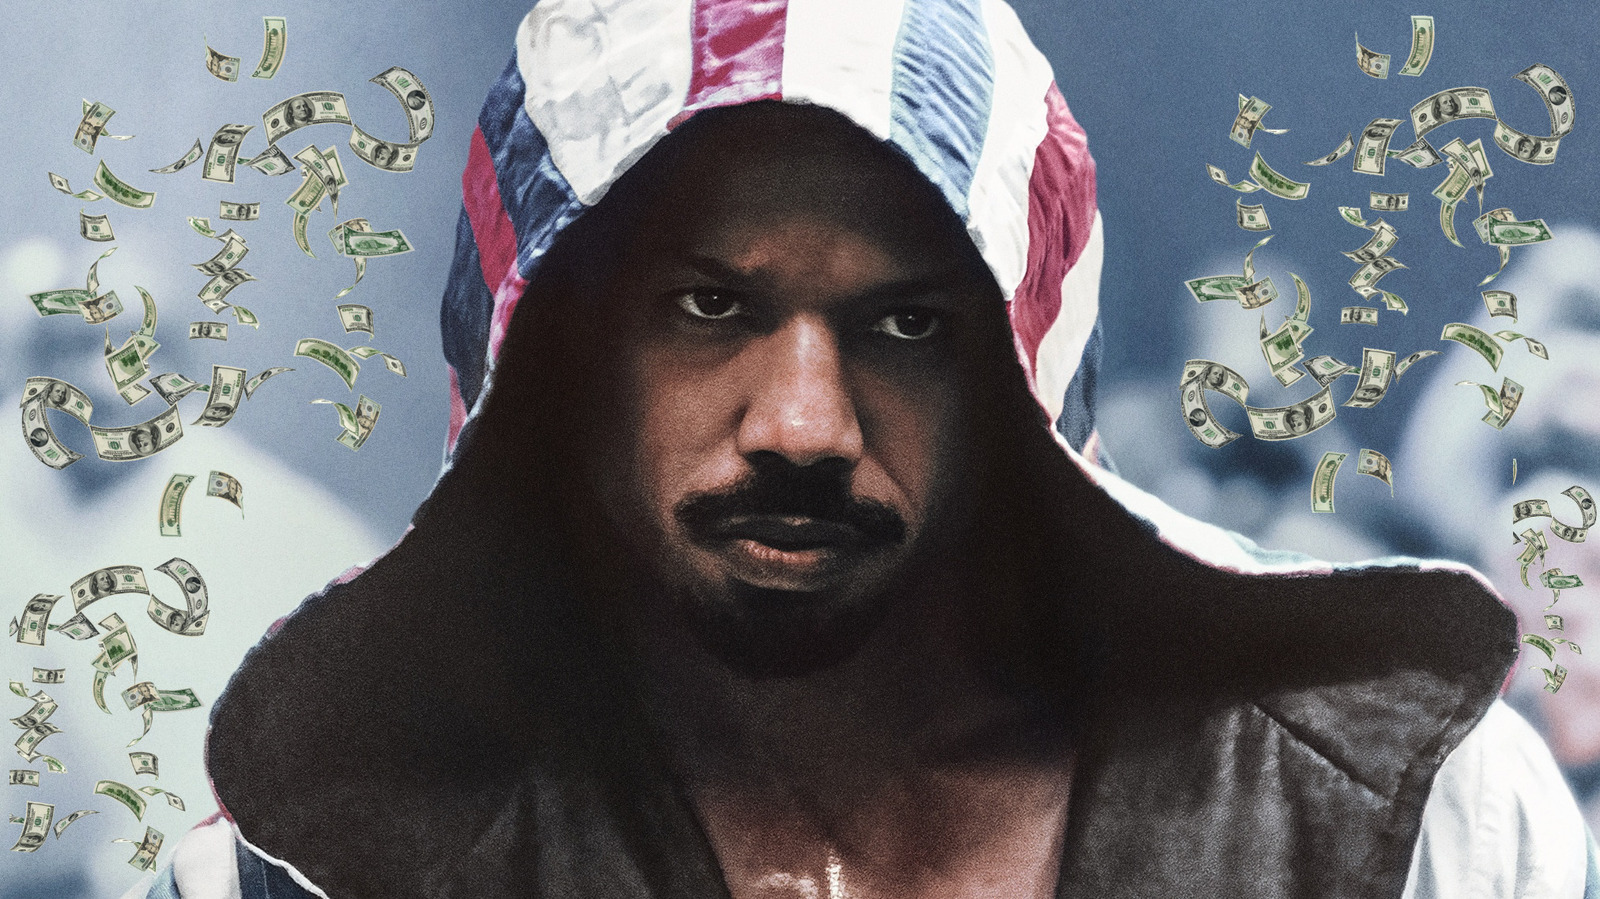 Creed III Set A Box Office Record For Rocky, All Without Sylvester Stallone